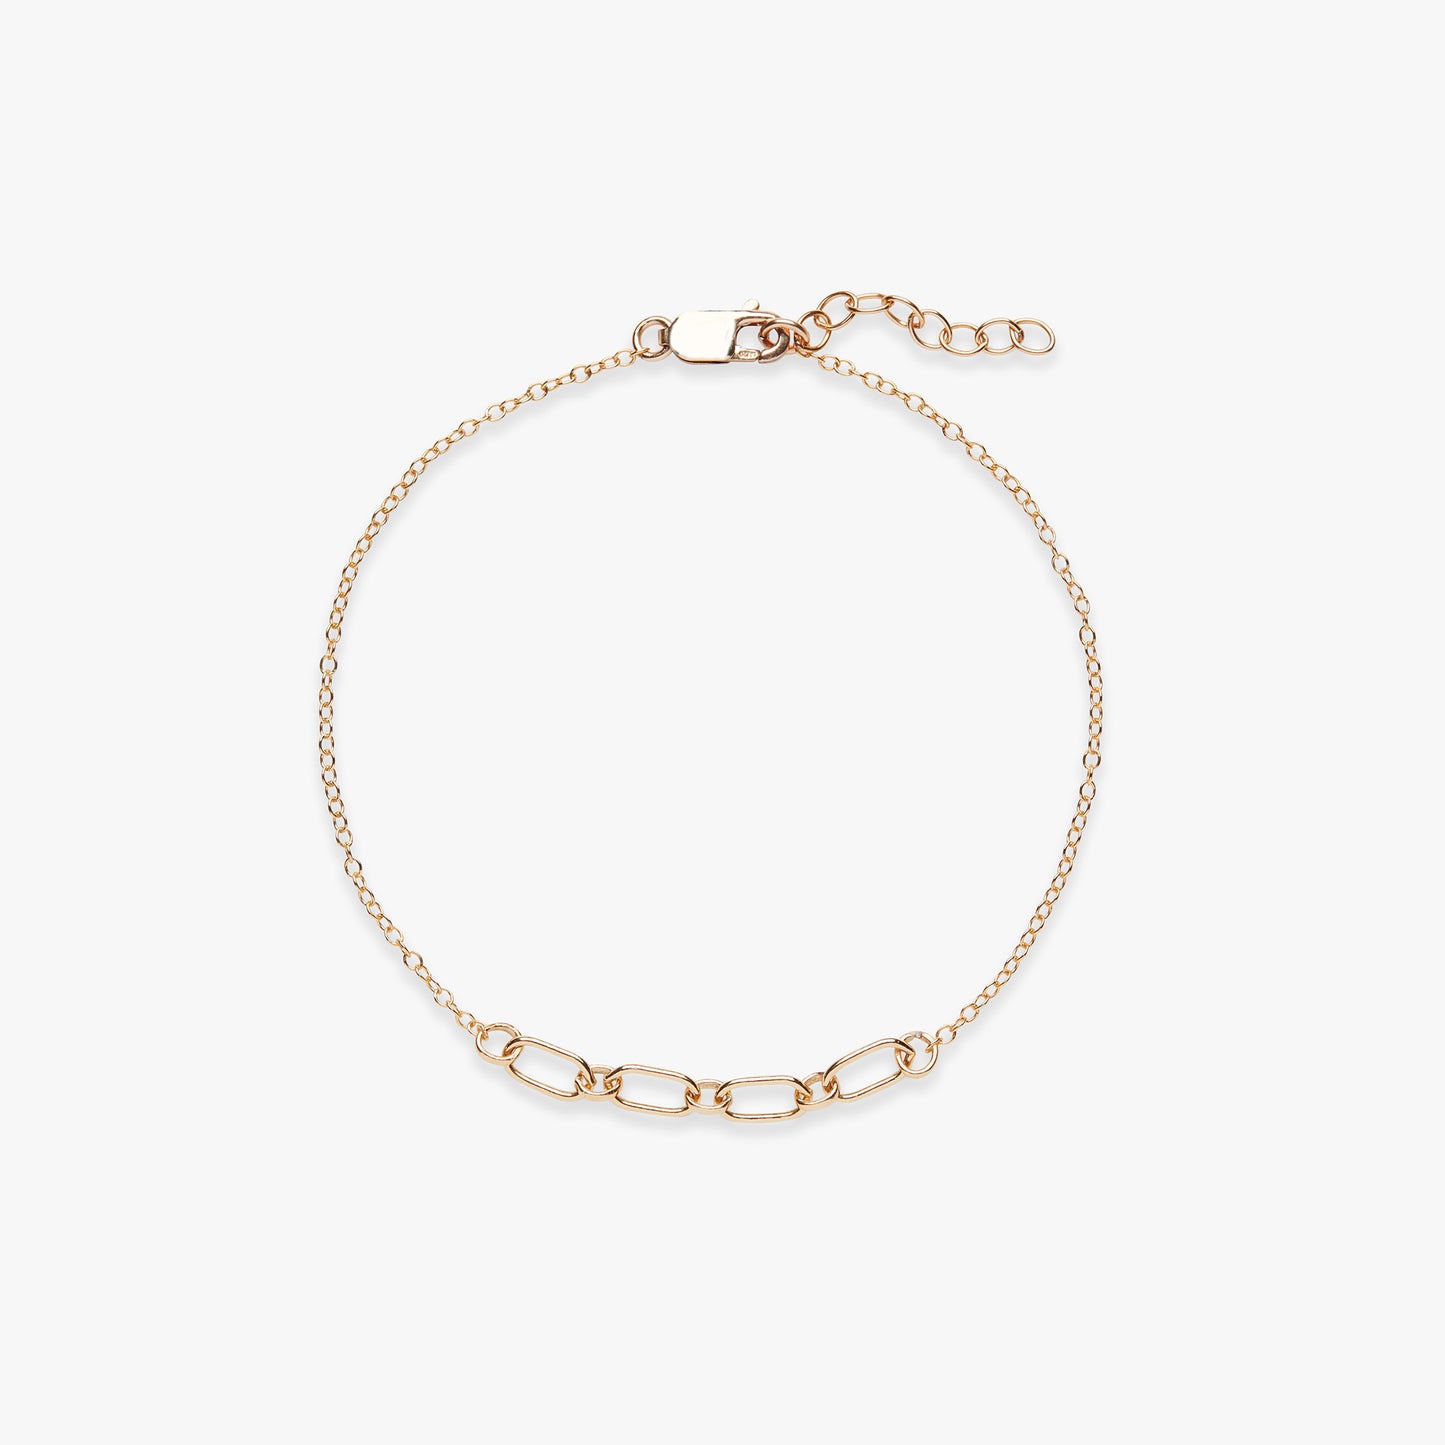 Laad afbeelding in Galerijviewer, Oval links armband gold filled
